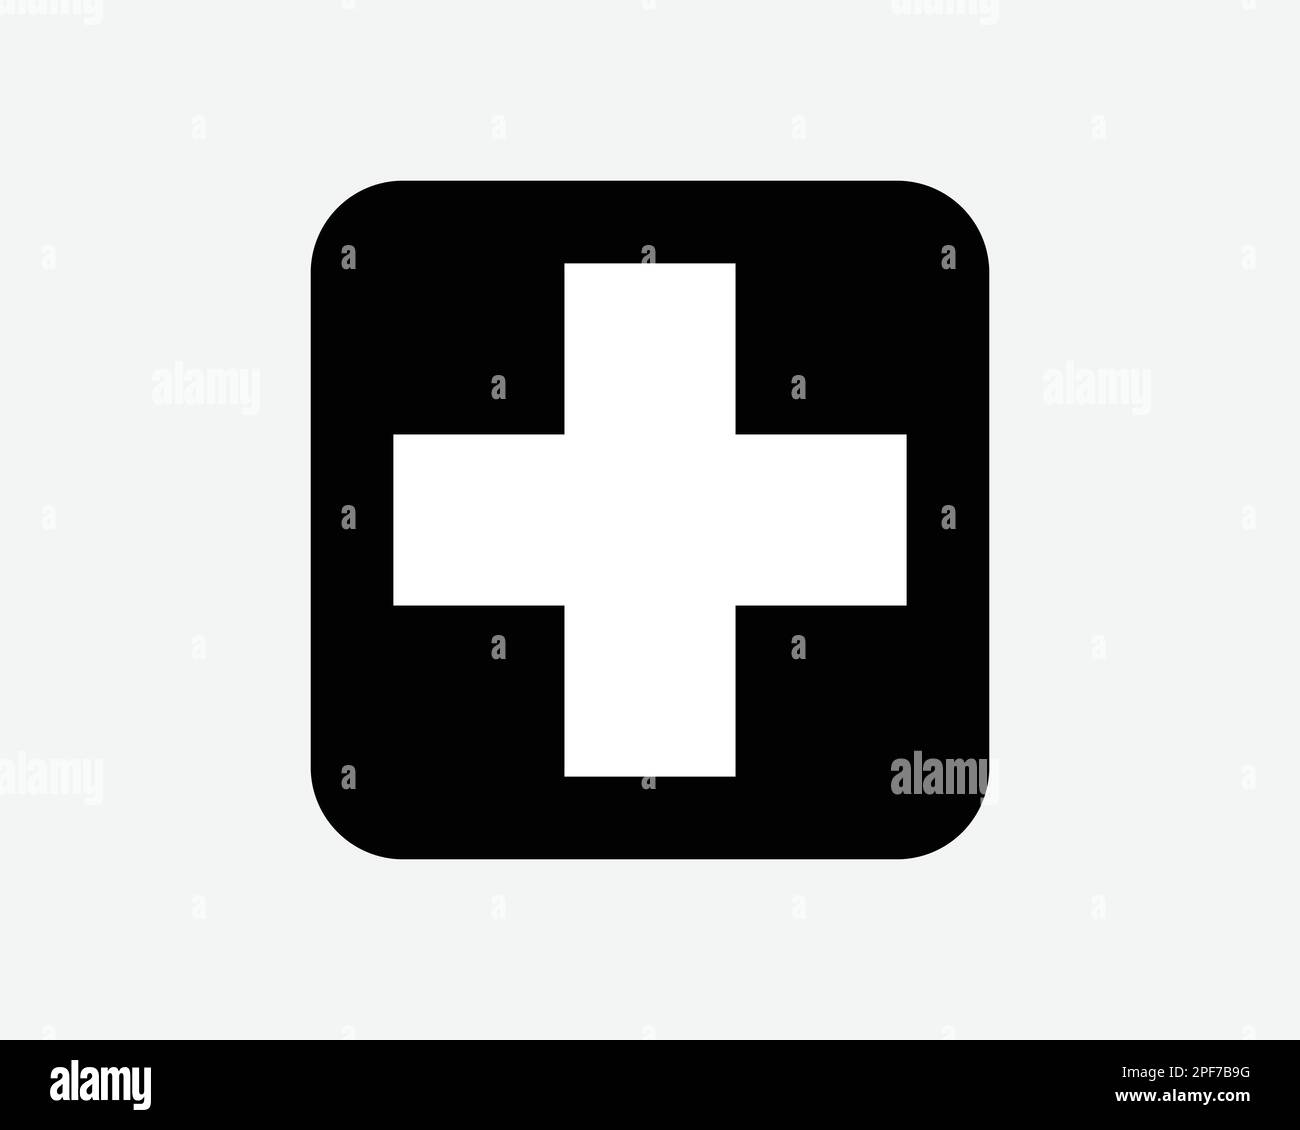 First Aid Cross Symbol Medical Emergency Humanitarian Care Black White Silhouette Sign Icon Vector Graphic Clipart Illustration Artwork Pictogram Stock Vector